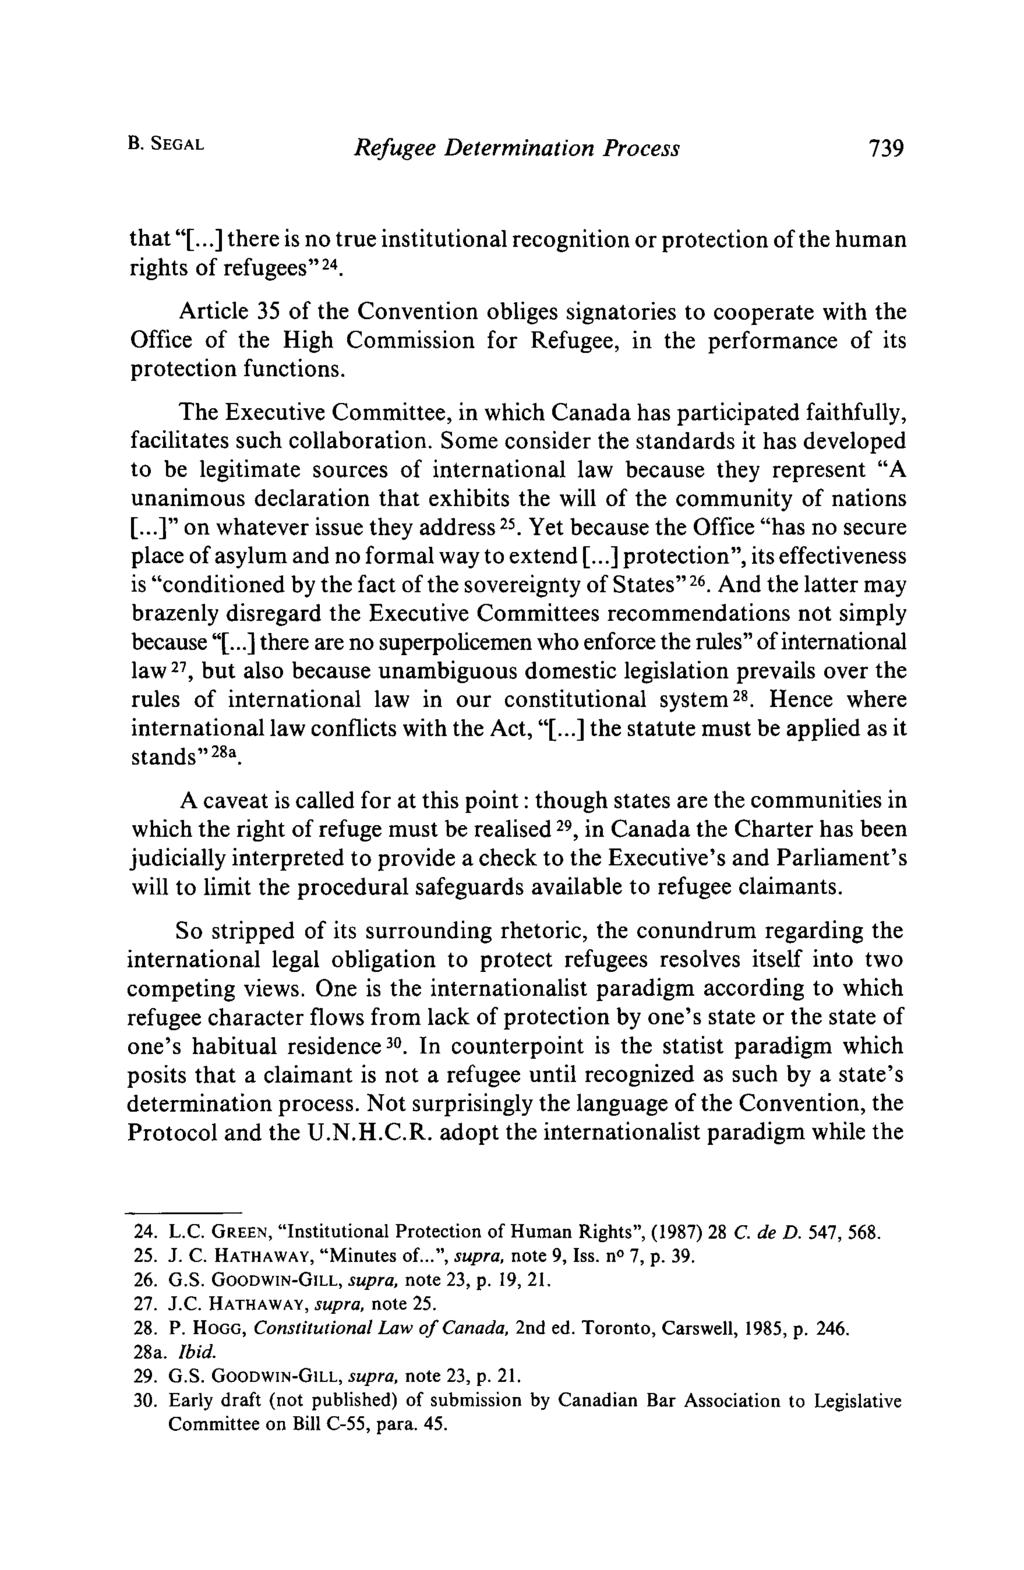 B. SEGAL Refugee Determination Process 739 that "[...] there is no true institutional recognition or protection of the human rights of refugees" 24.